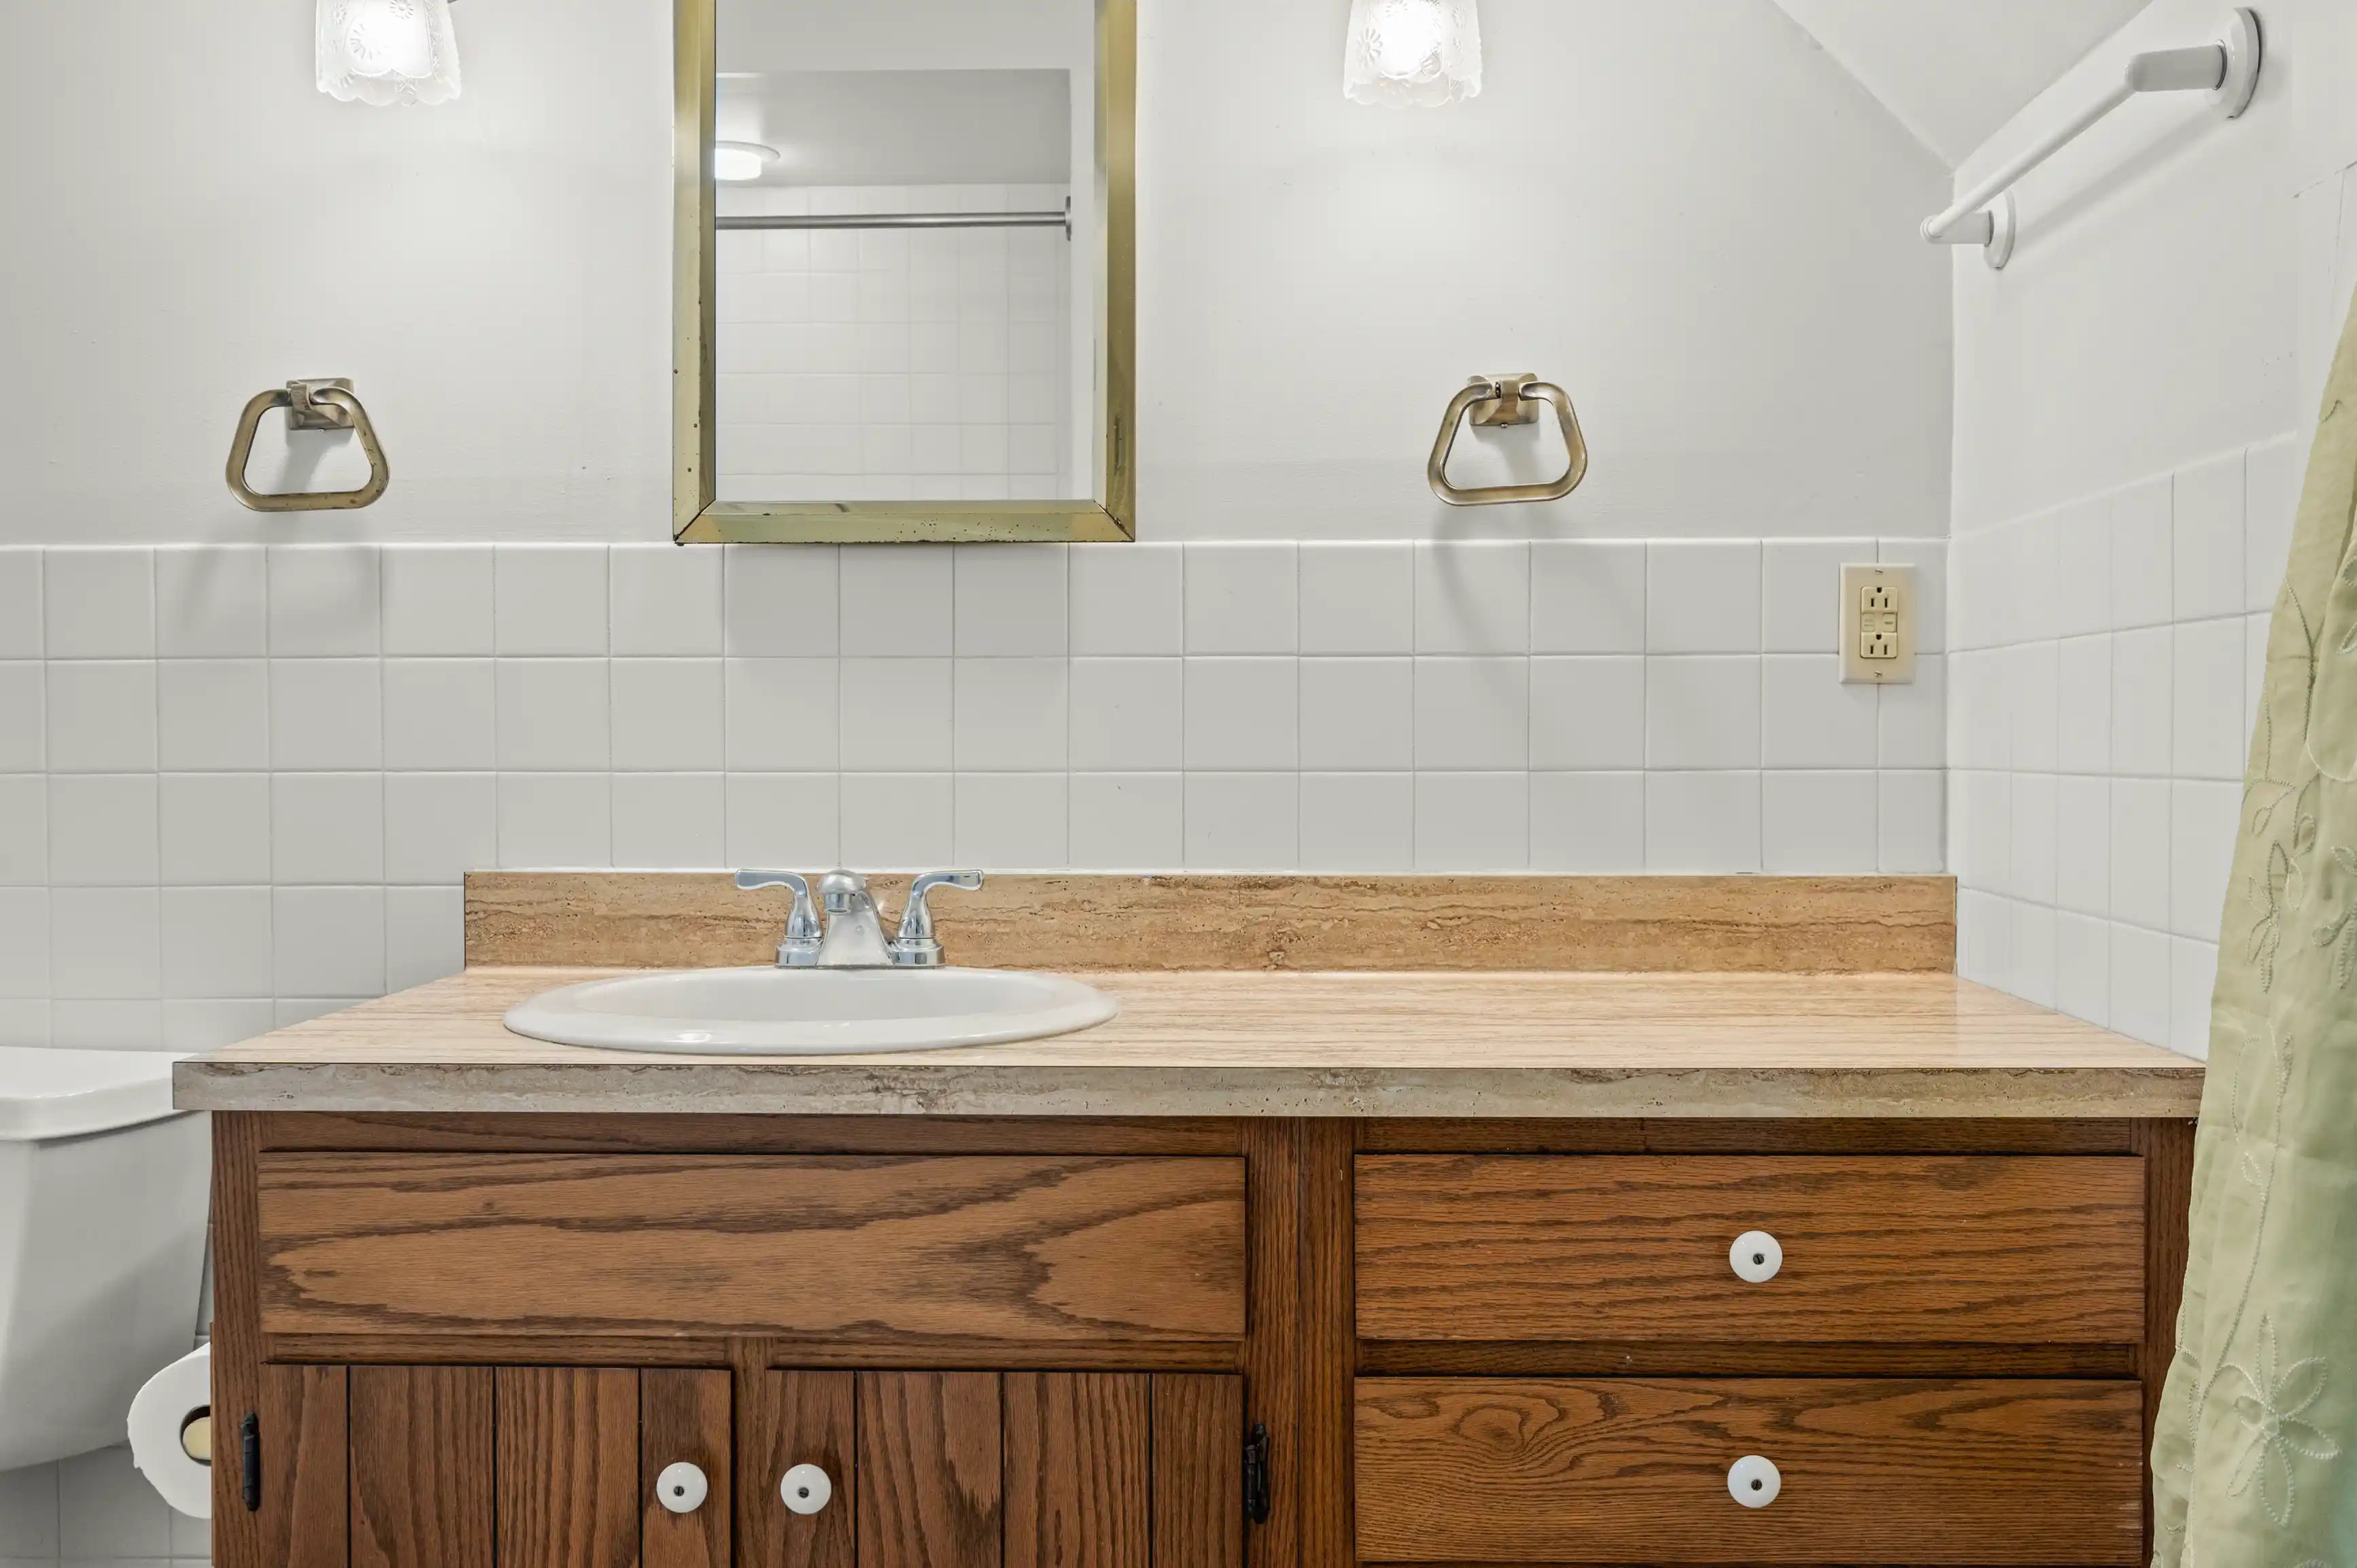 A neatly organized bathroom with white tiling, a wooden vanity with a beige countertop and white sink, a rectangular mirror with metallic frame above the sink flanked by wall-mounted lights, and a partial view of a bathtub with a pale green shower curtain to the right.